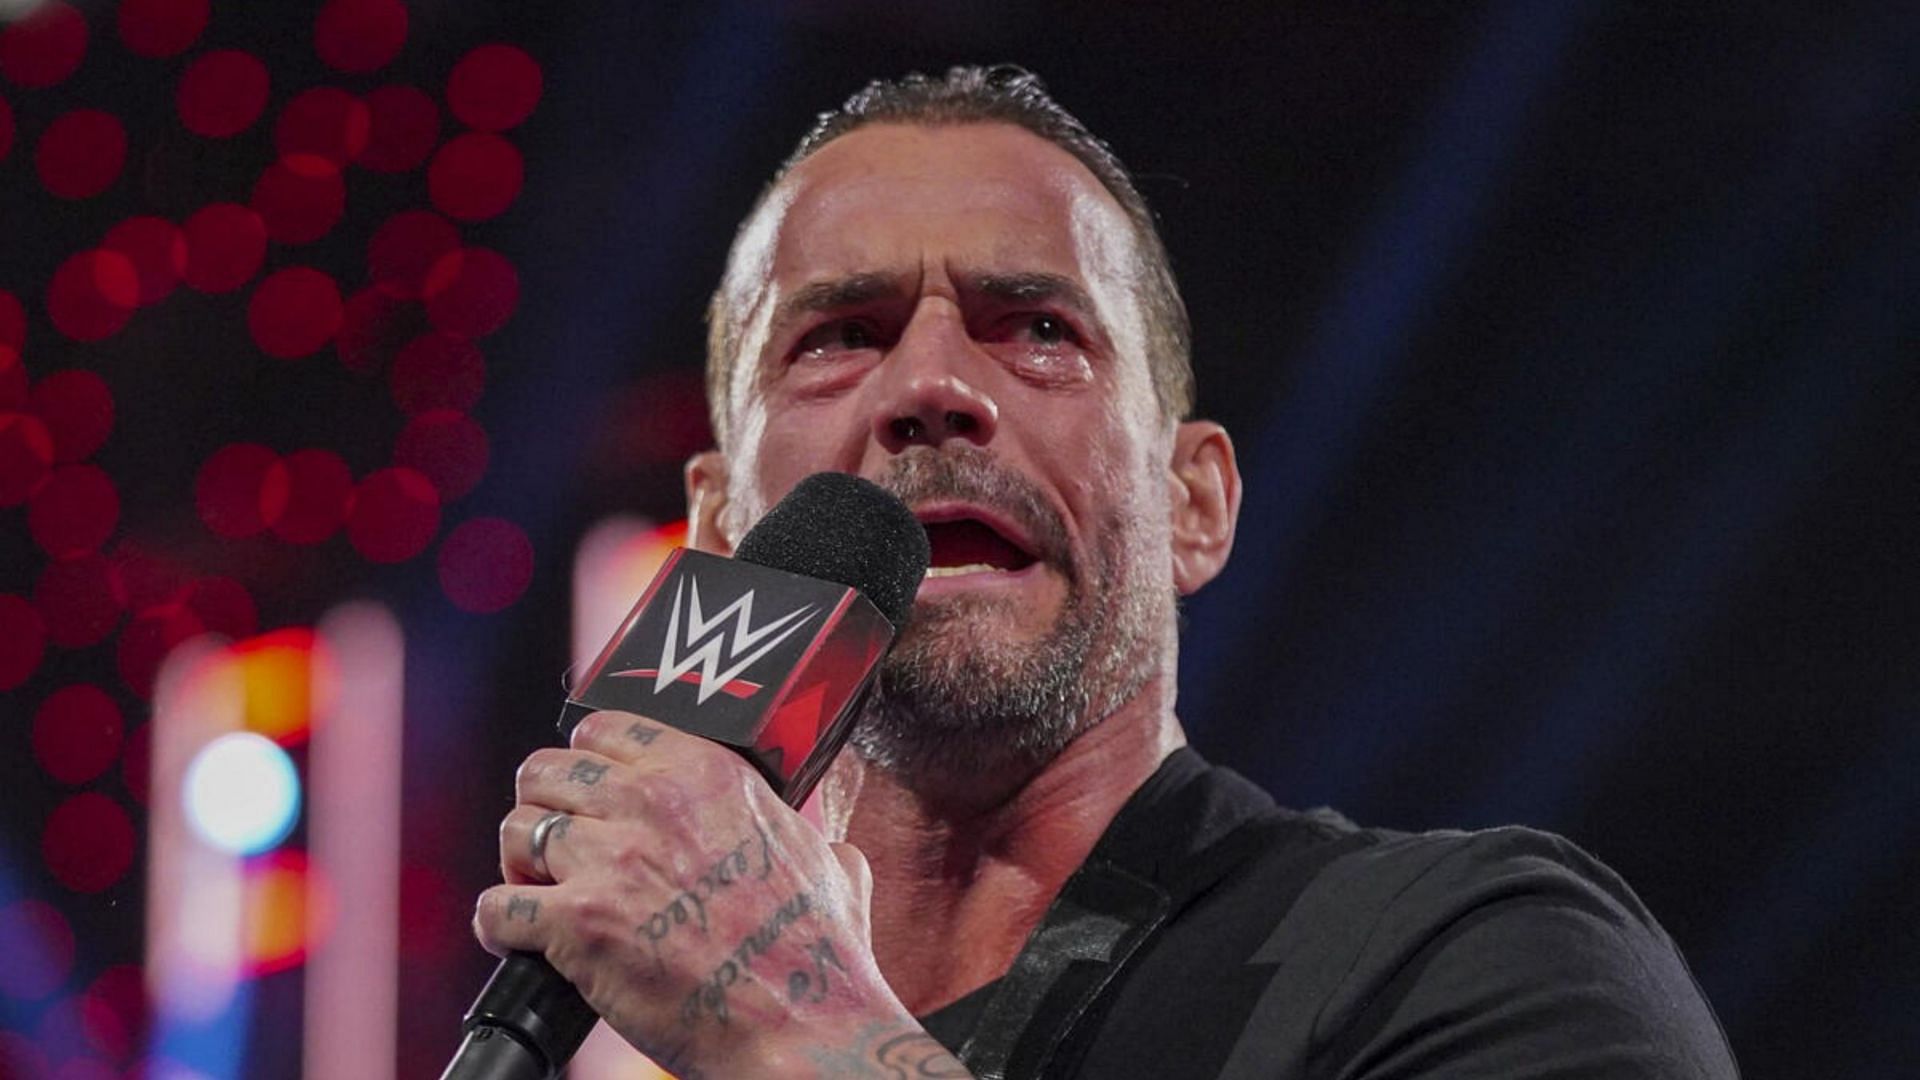 CM Punk is currently on the WWE RAW roster